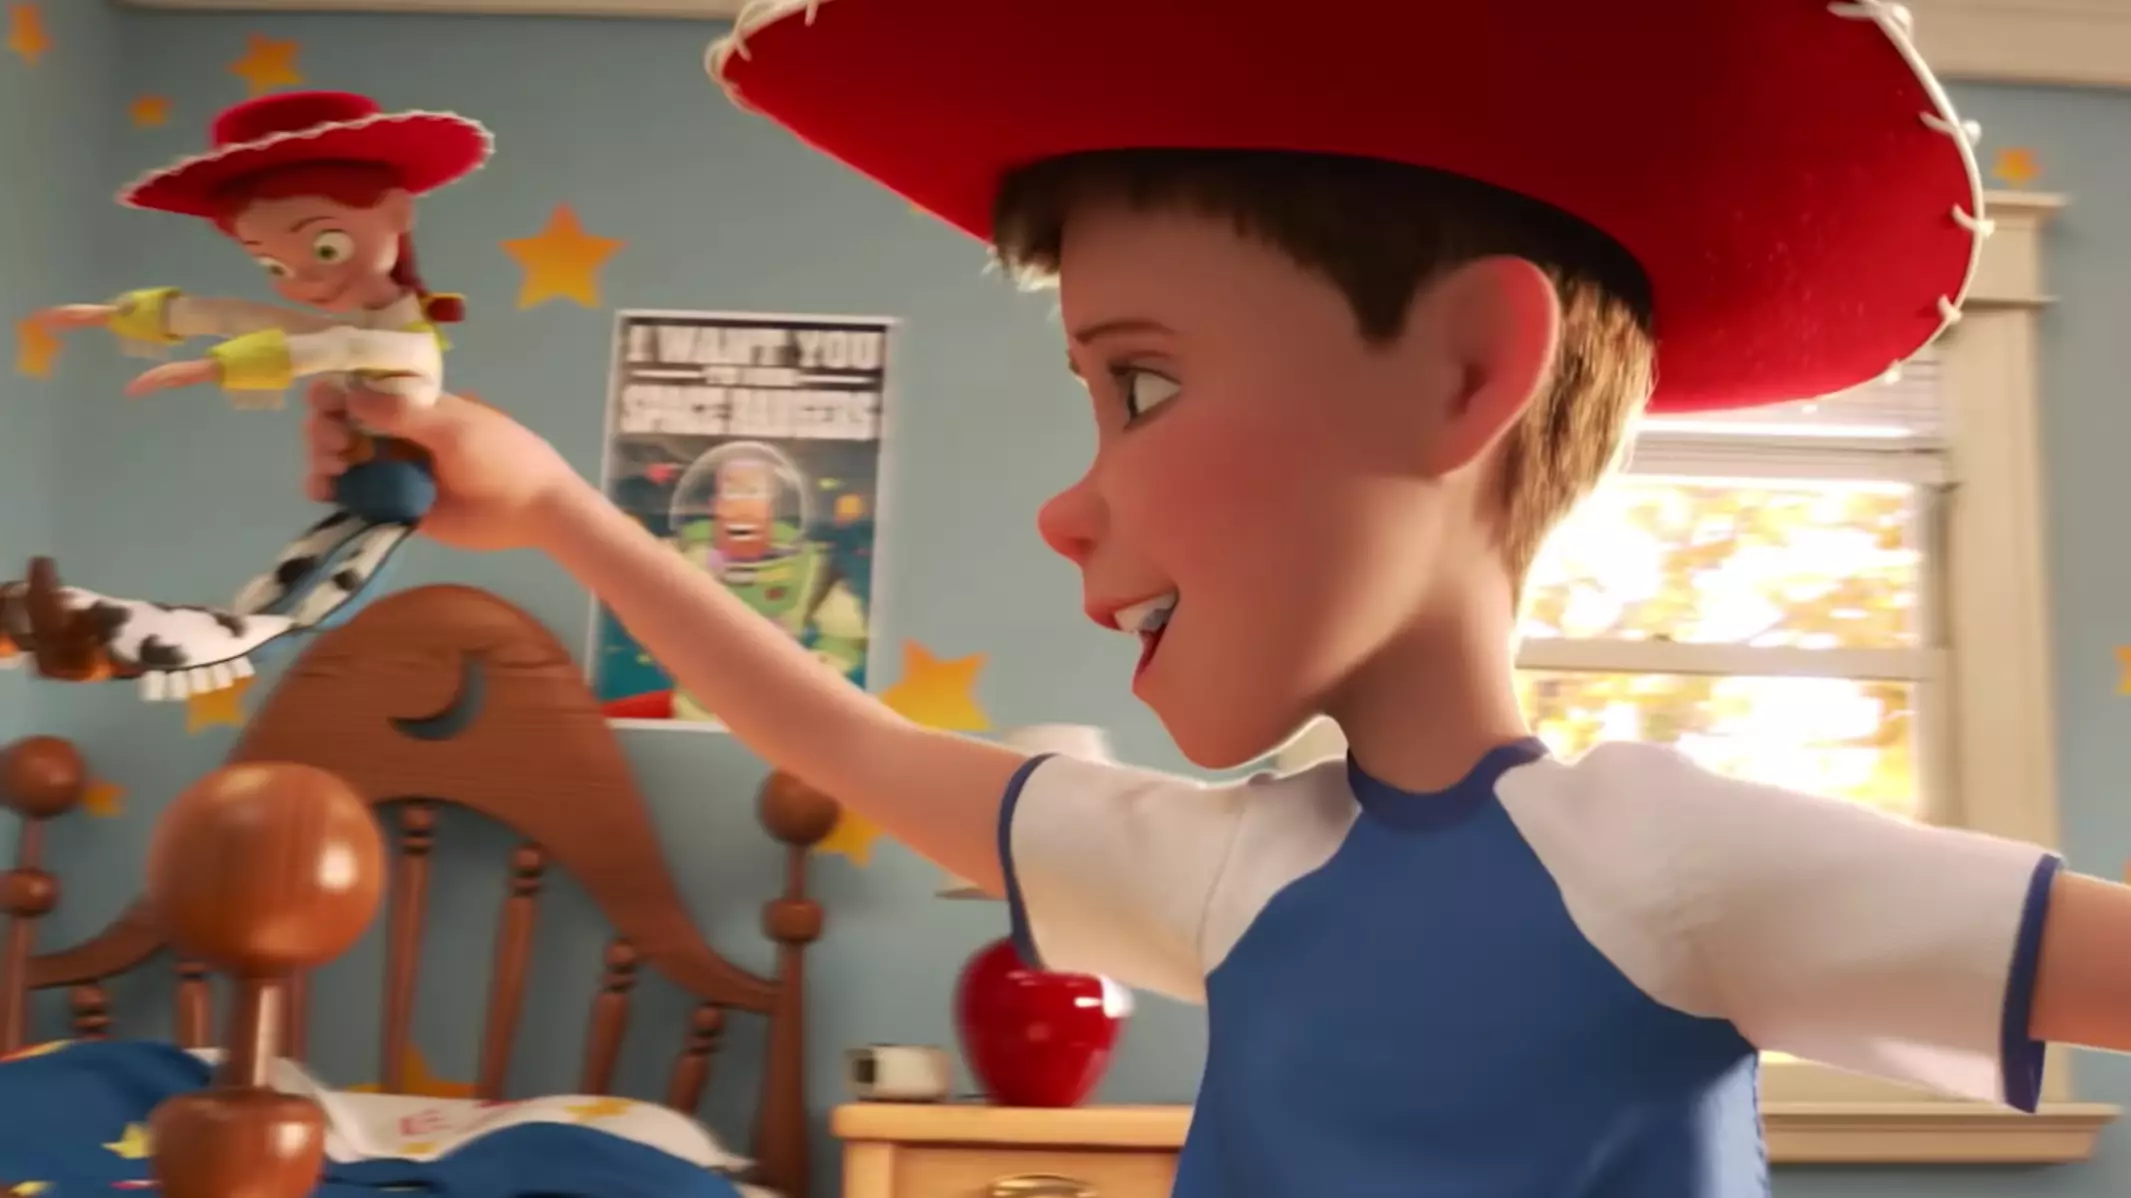 People Are Questioning Why Andy Looks Different In The 'Toy Story 4' Trailer